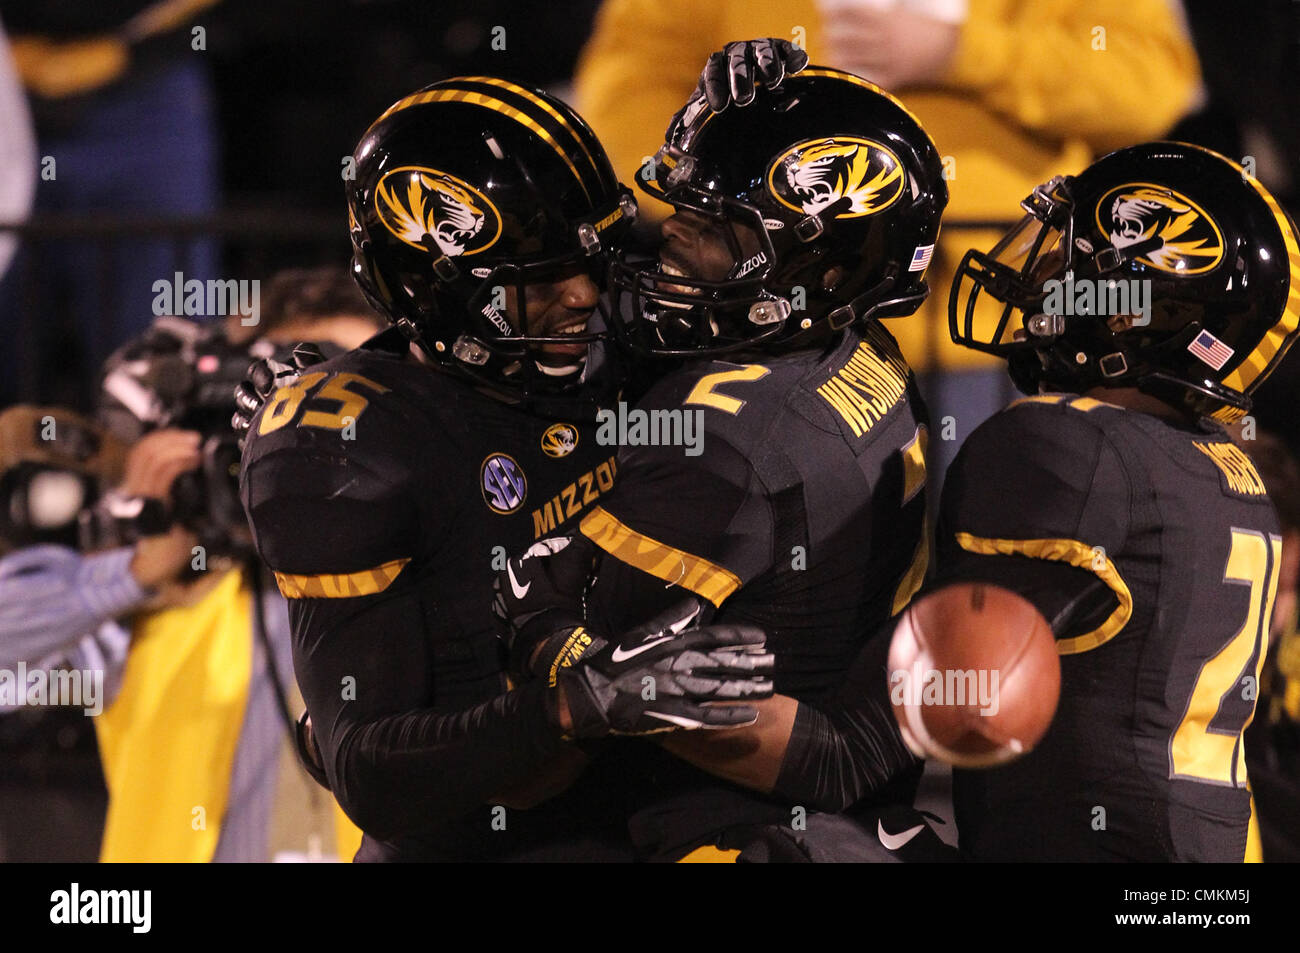 Nov. 2, 2013 - November 02, 2013 Columbia, MO: Missouri Tigers wide receivers Marcus Lucas (85), L'Damian Washington (2) and Bud Sasser (21) celebrate a touchdown during the NCAA football game between the Missouri Tigers and the Tennessee Volunteers at Faurot Field in Columbia, Missouri. Billy Hurst/CSM Stock Photo